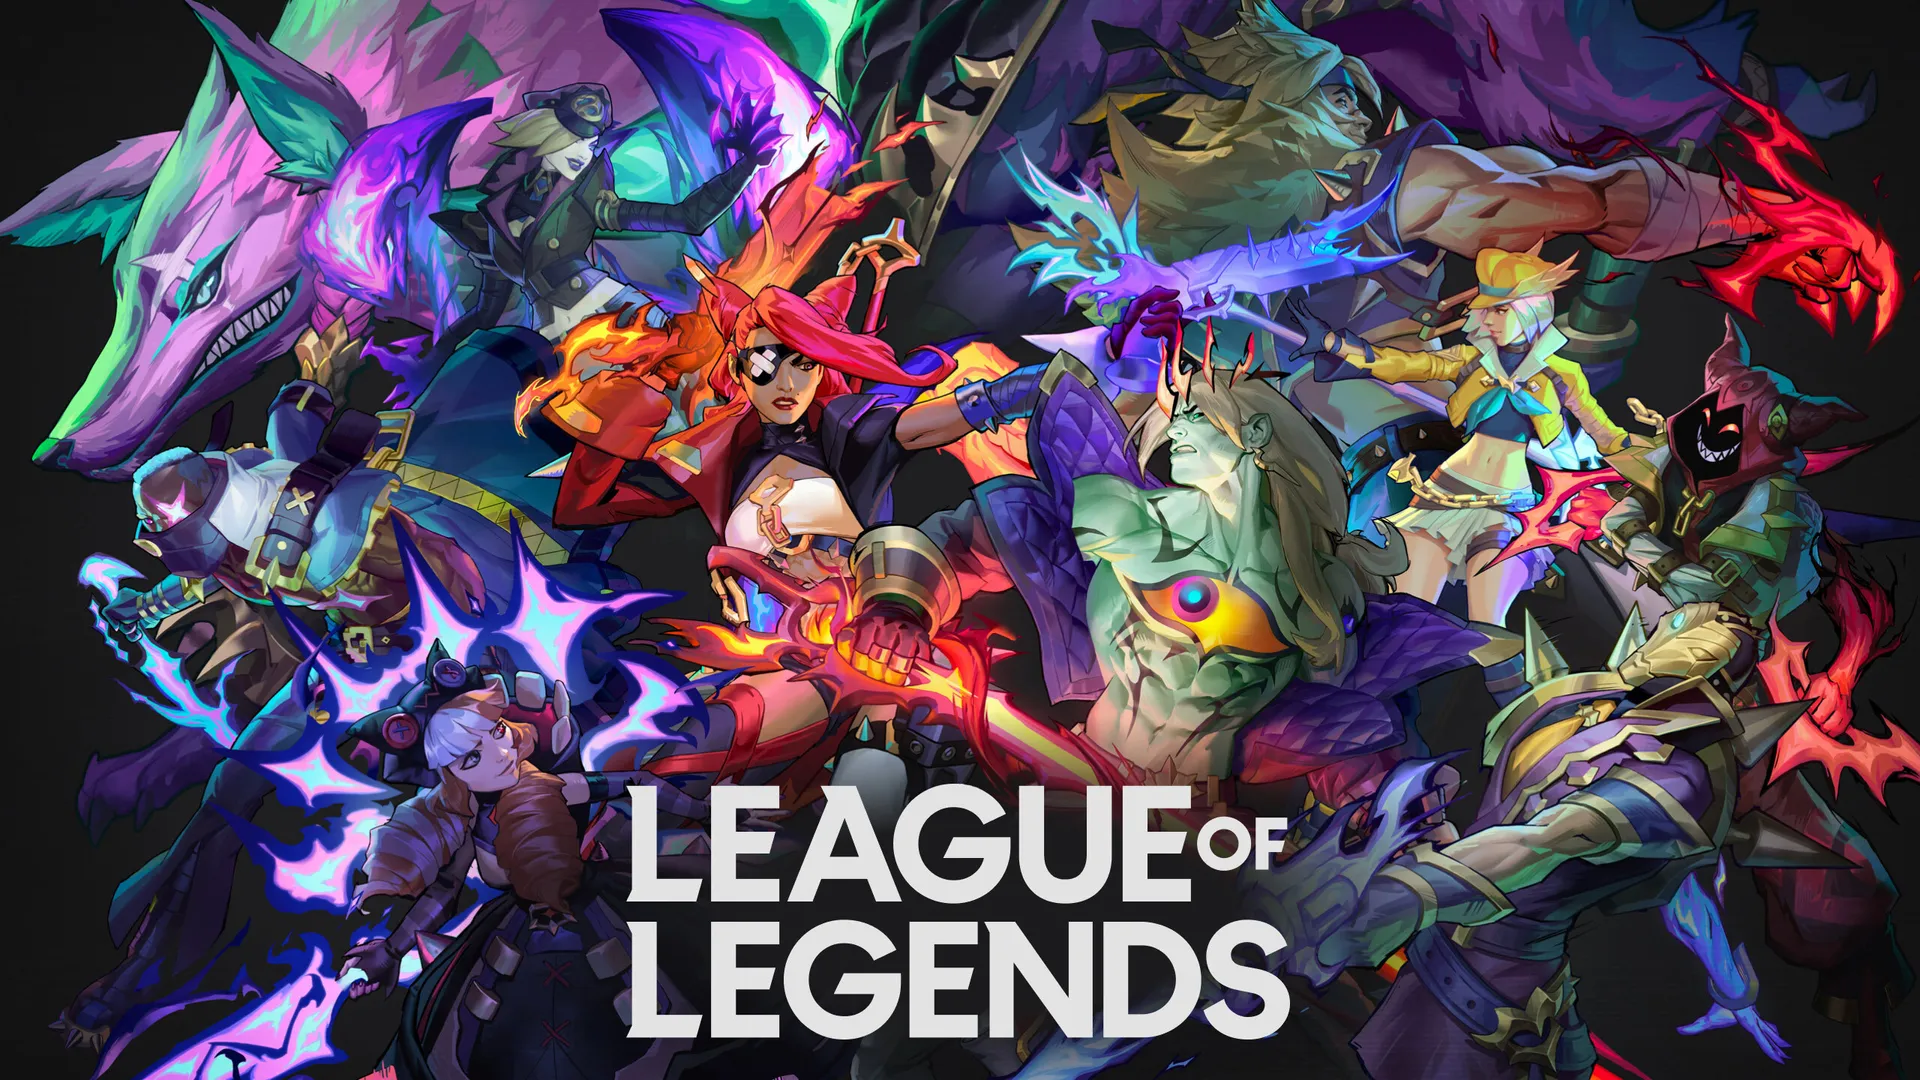 When does LoL season 2023 end? Split 2 end date and time, rewards